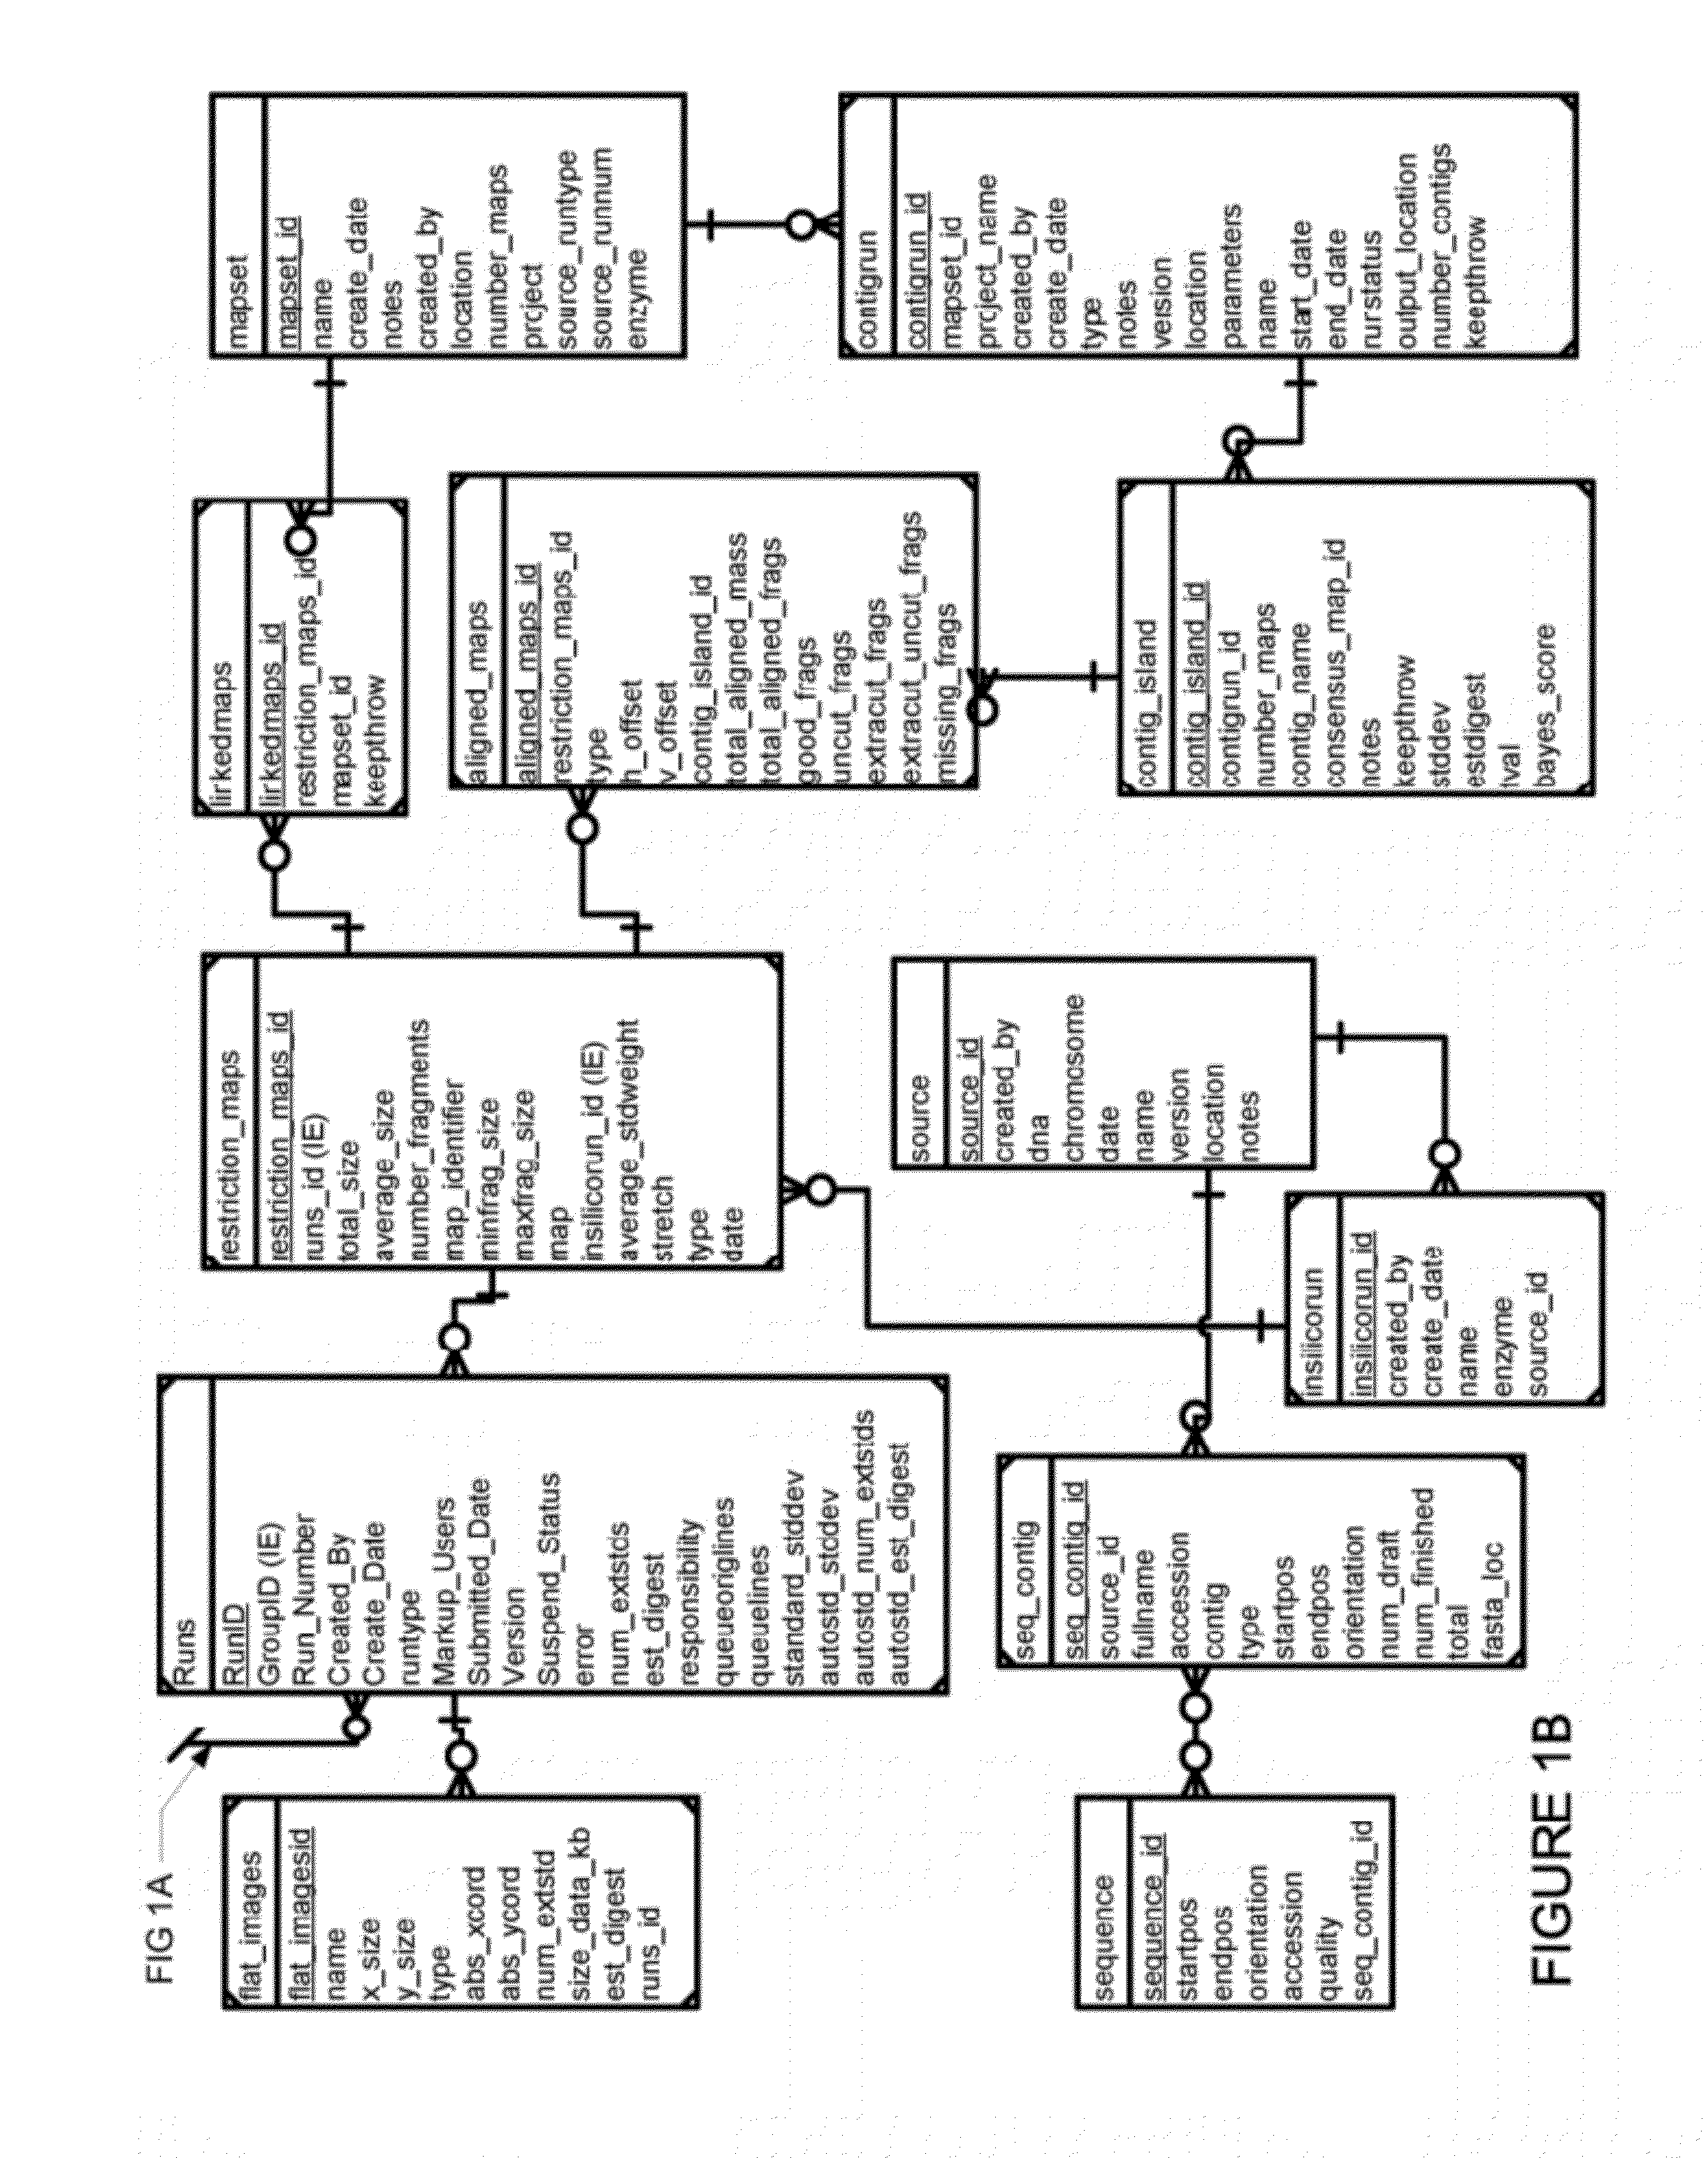 Computer database system for single molecule data management and analysis